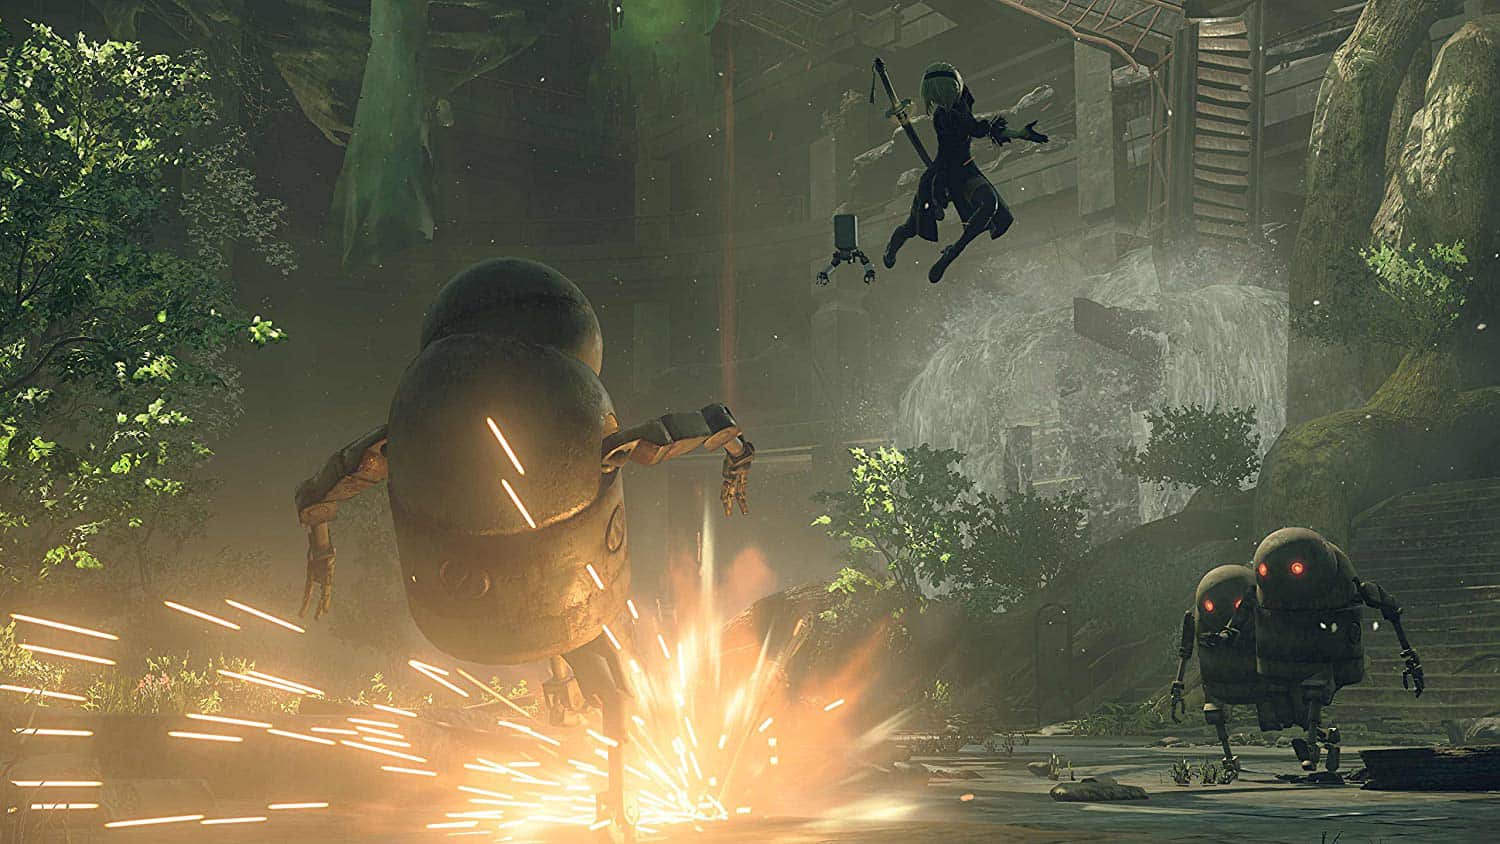 Nier Automata Review: is Nier Automata Game worth it